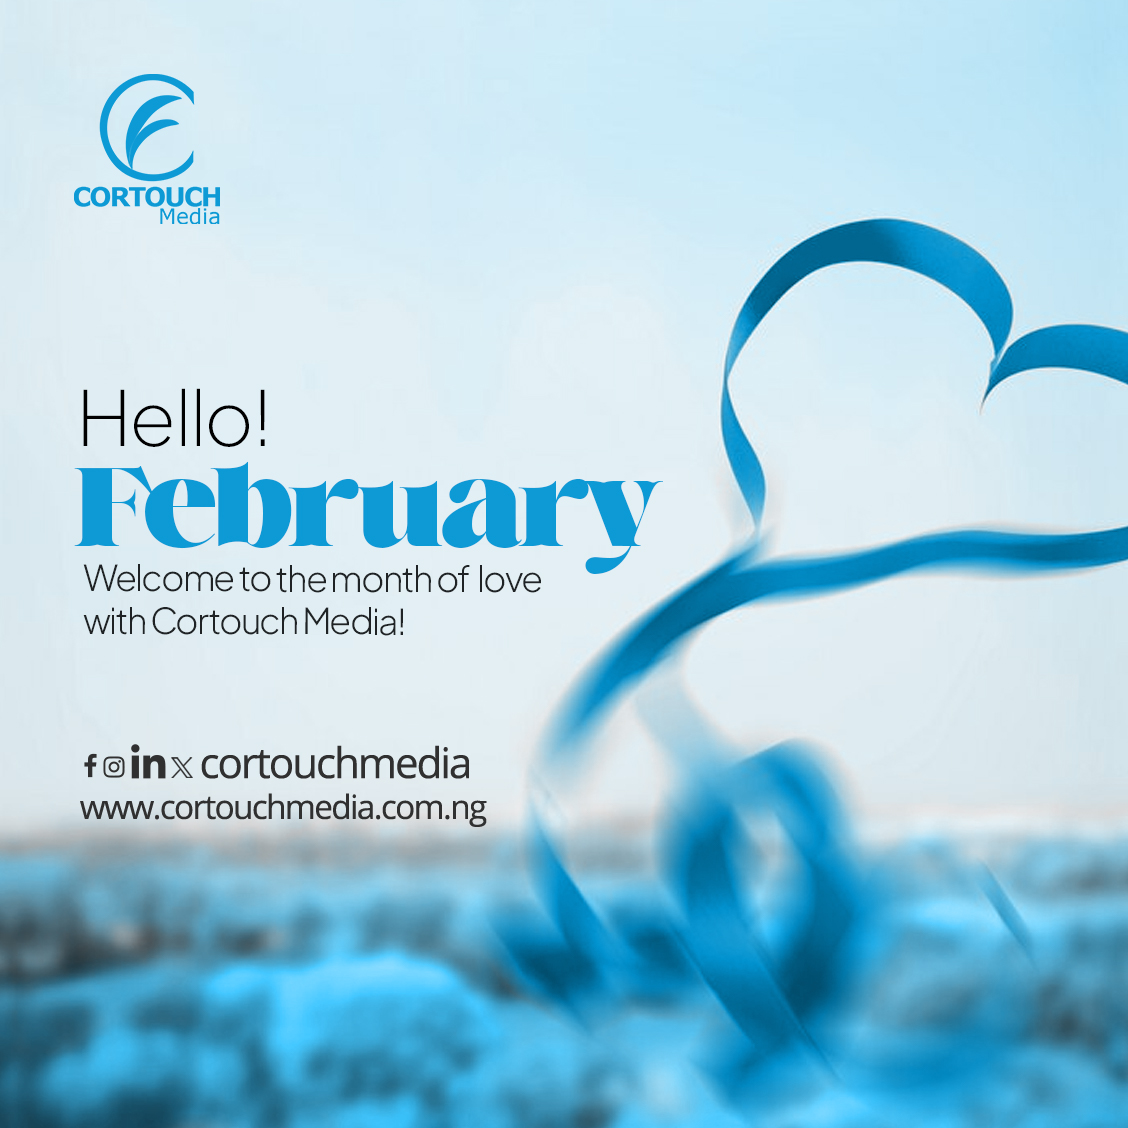 Hello, February! Welcome to the month of love with Cortouch Media!  In this season of affection, we're ready to amplify your brand's love story. 

#Cortouchmedia #CortouchLove #MediaMagic #HelloFebruary #MonthOfLove #BrandStorytelling #CreativeMinds #DigitalInnovation #Rufai